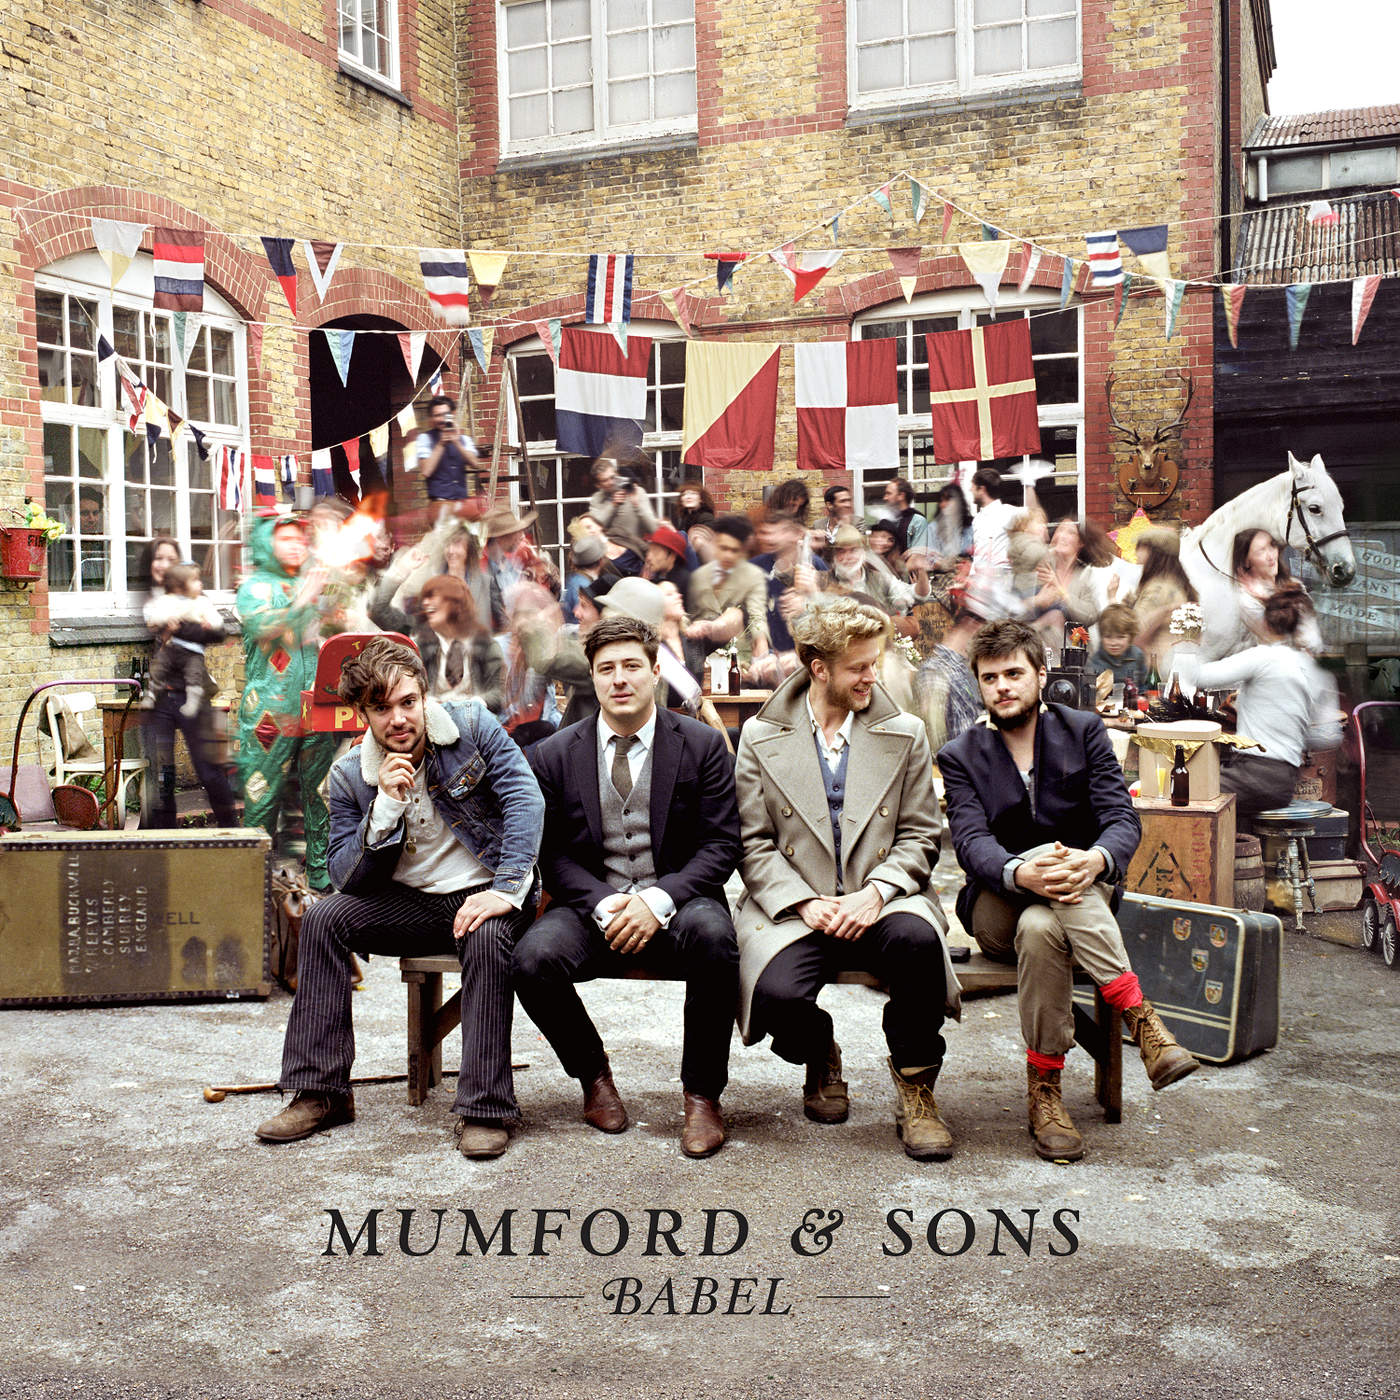 Mumford & Sons - The Boxer POSmusic background music streaming platform medical practice music playlists 